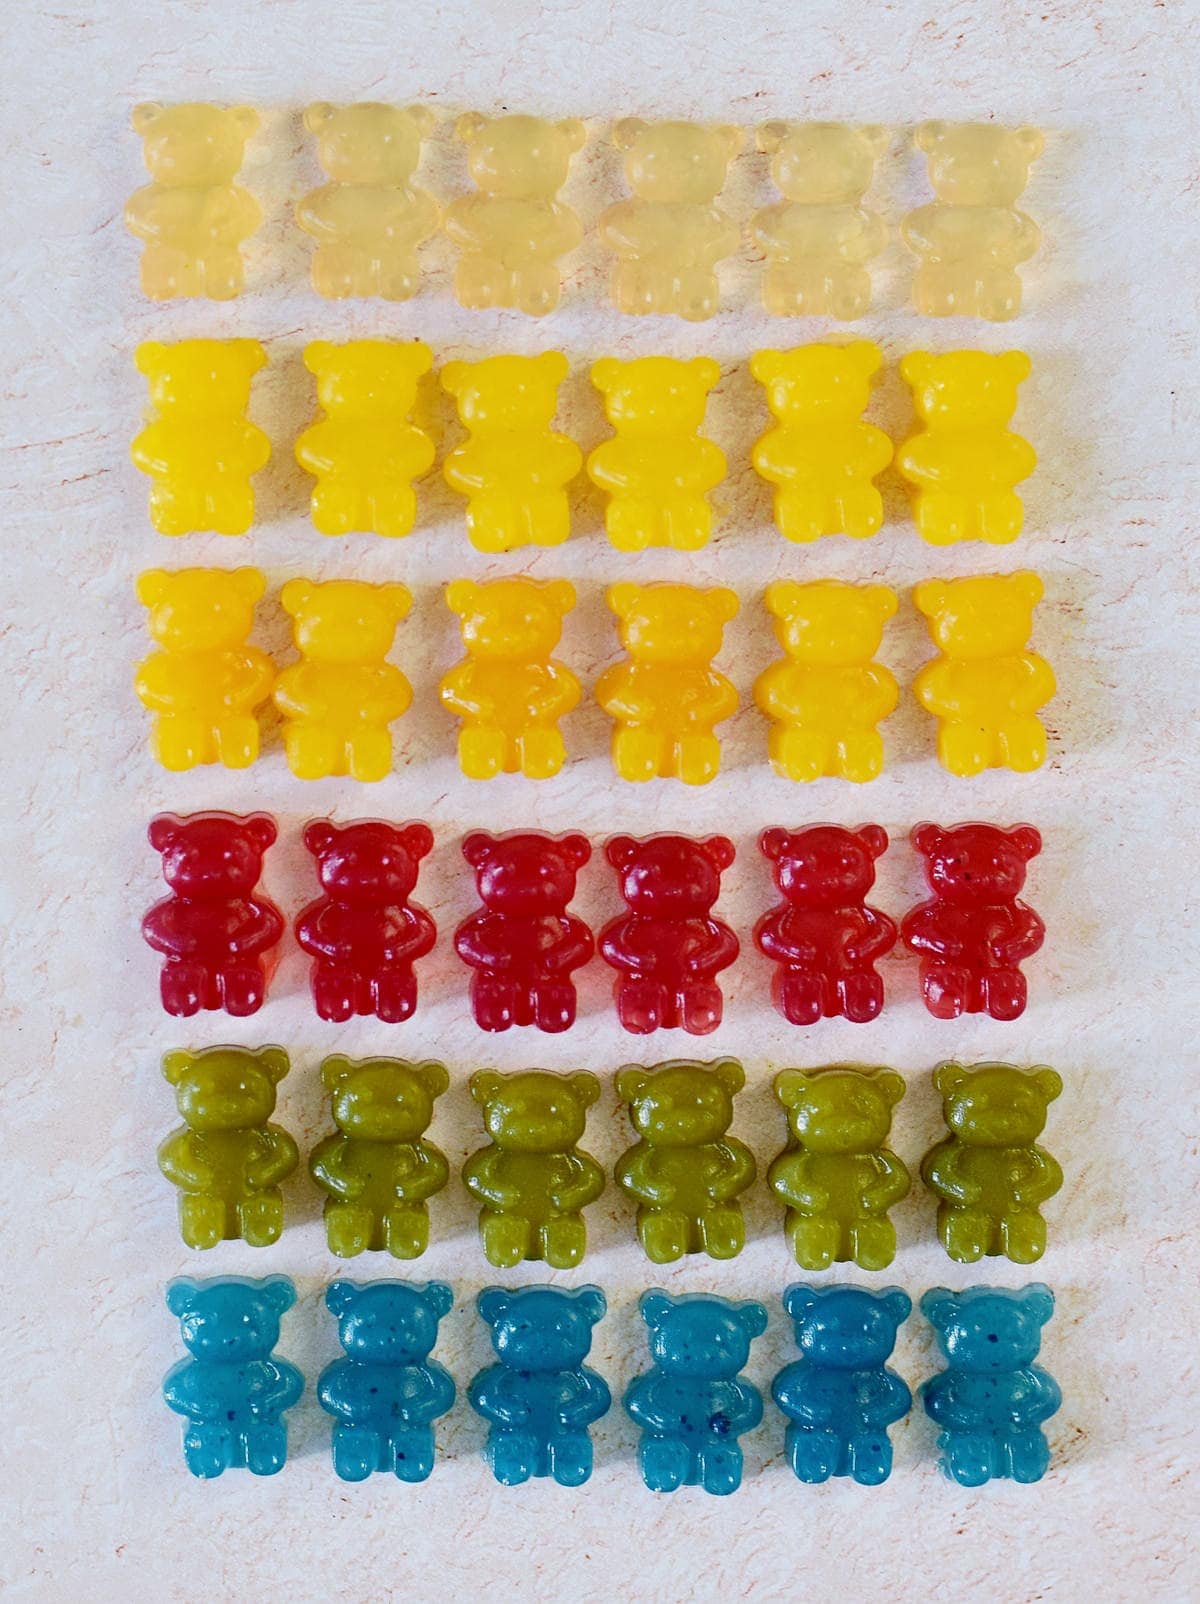 vegan gummy bears in 6 different colors in several rows